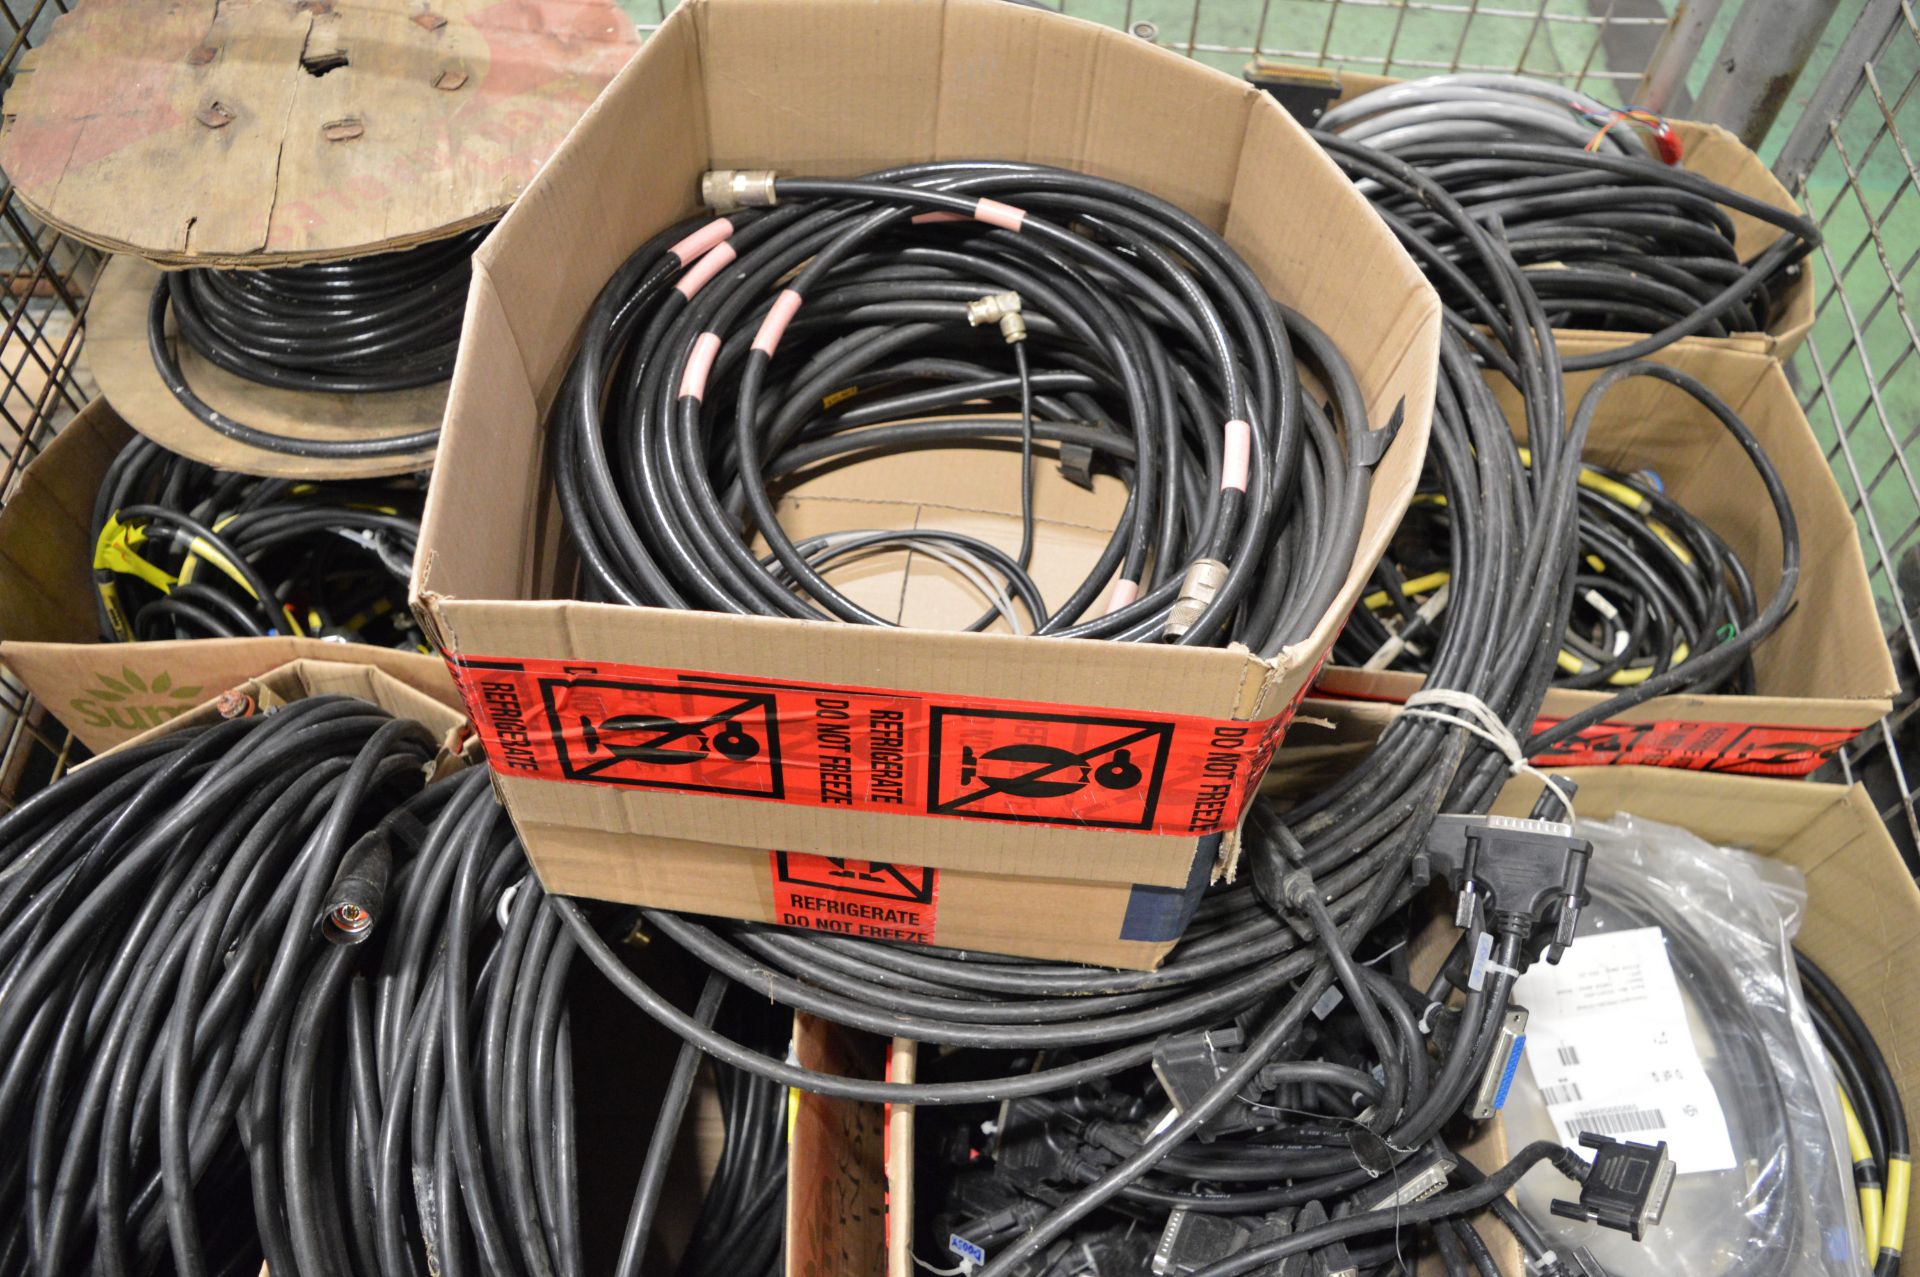 12x Boxes/Reels Assorted Communications Cable. - Image 2 of 2